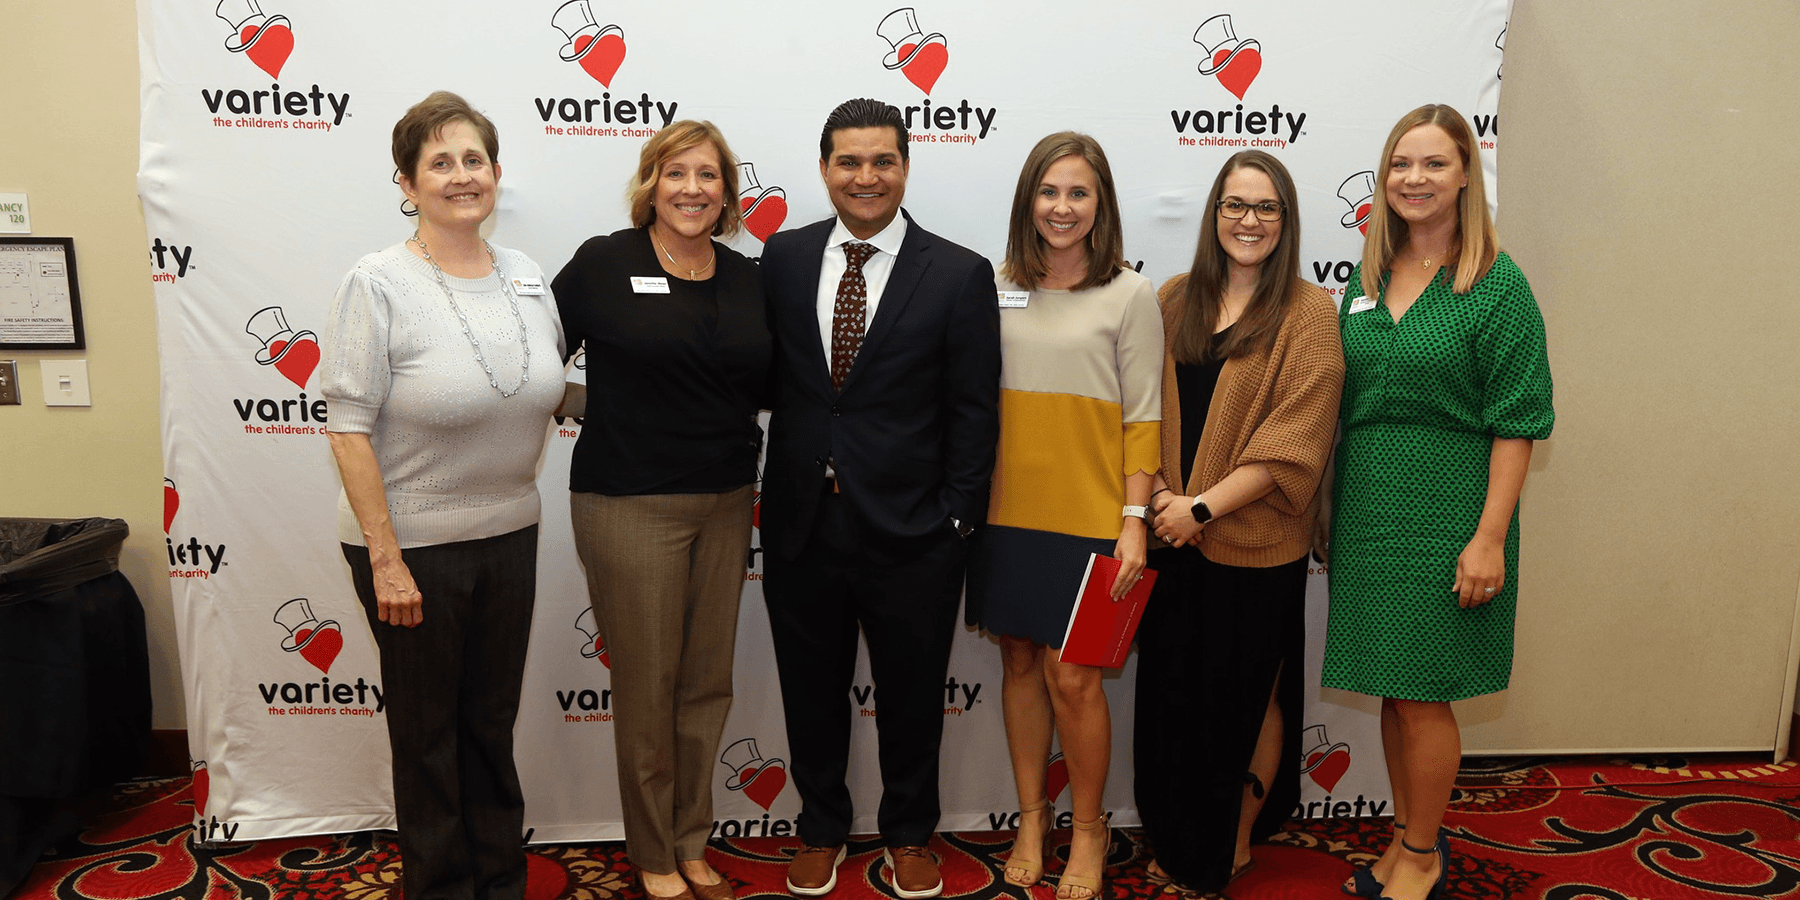 CCC RECEIVES GRANT FROM VARIETY - THE CHILDREN'S CHARITY